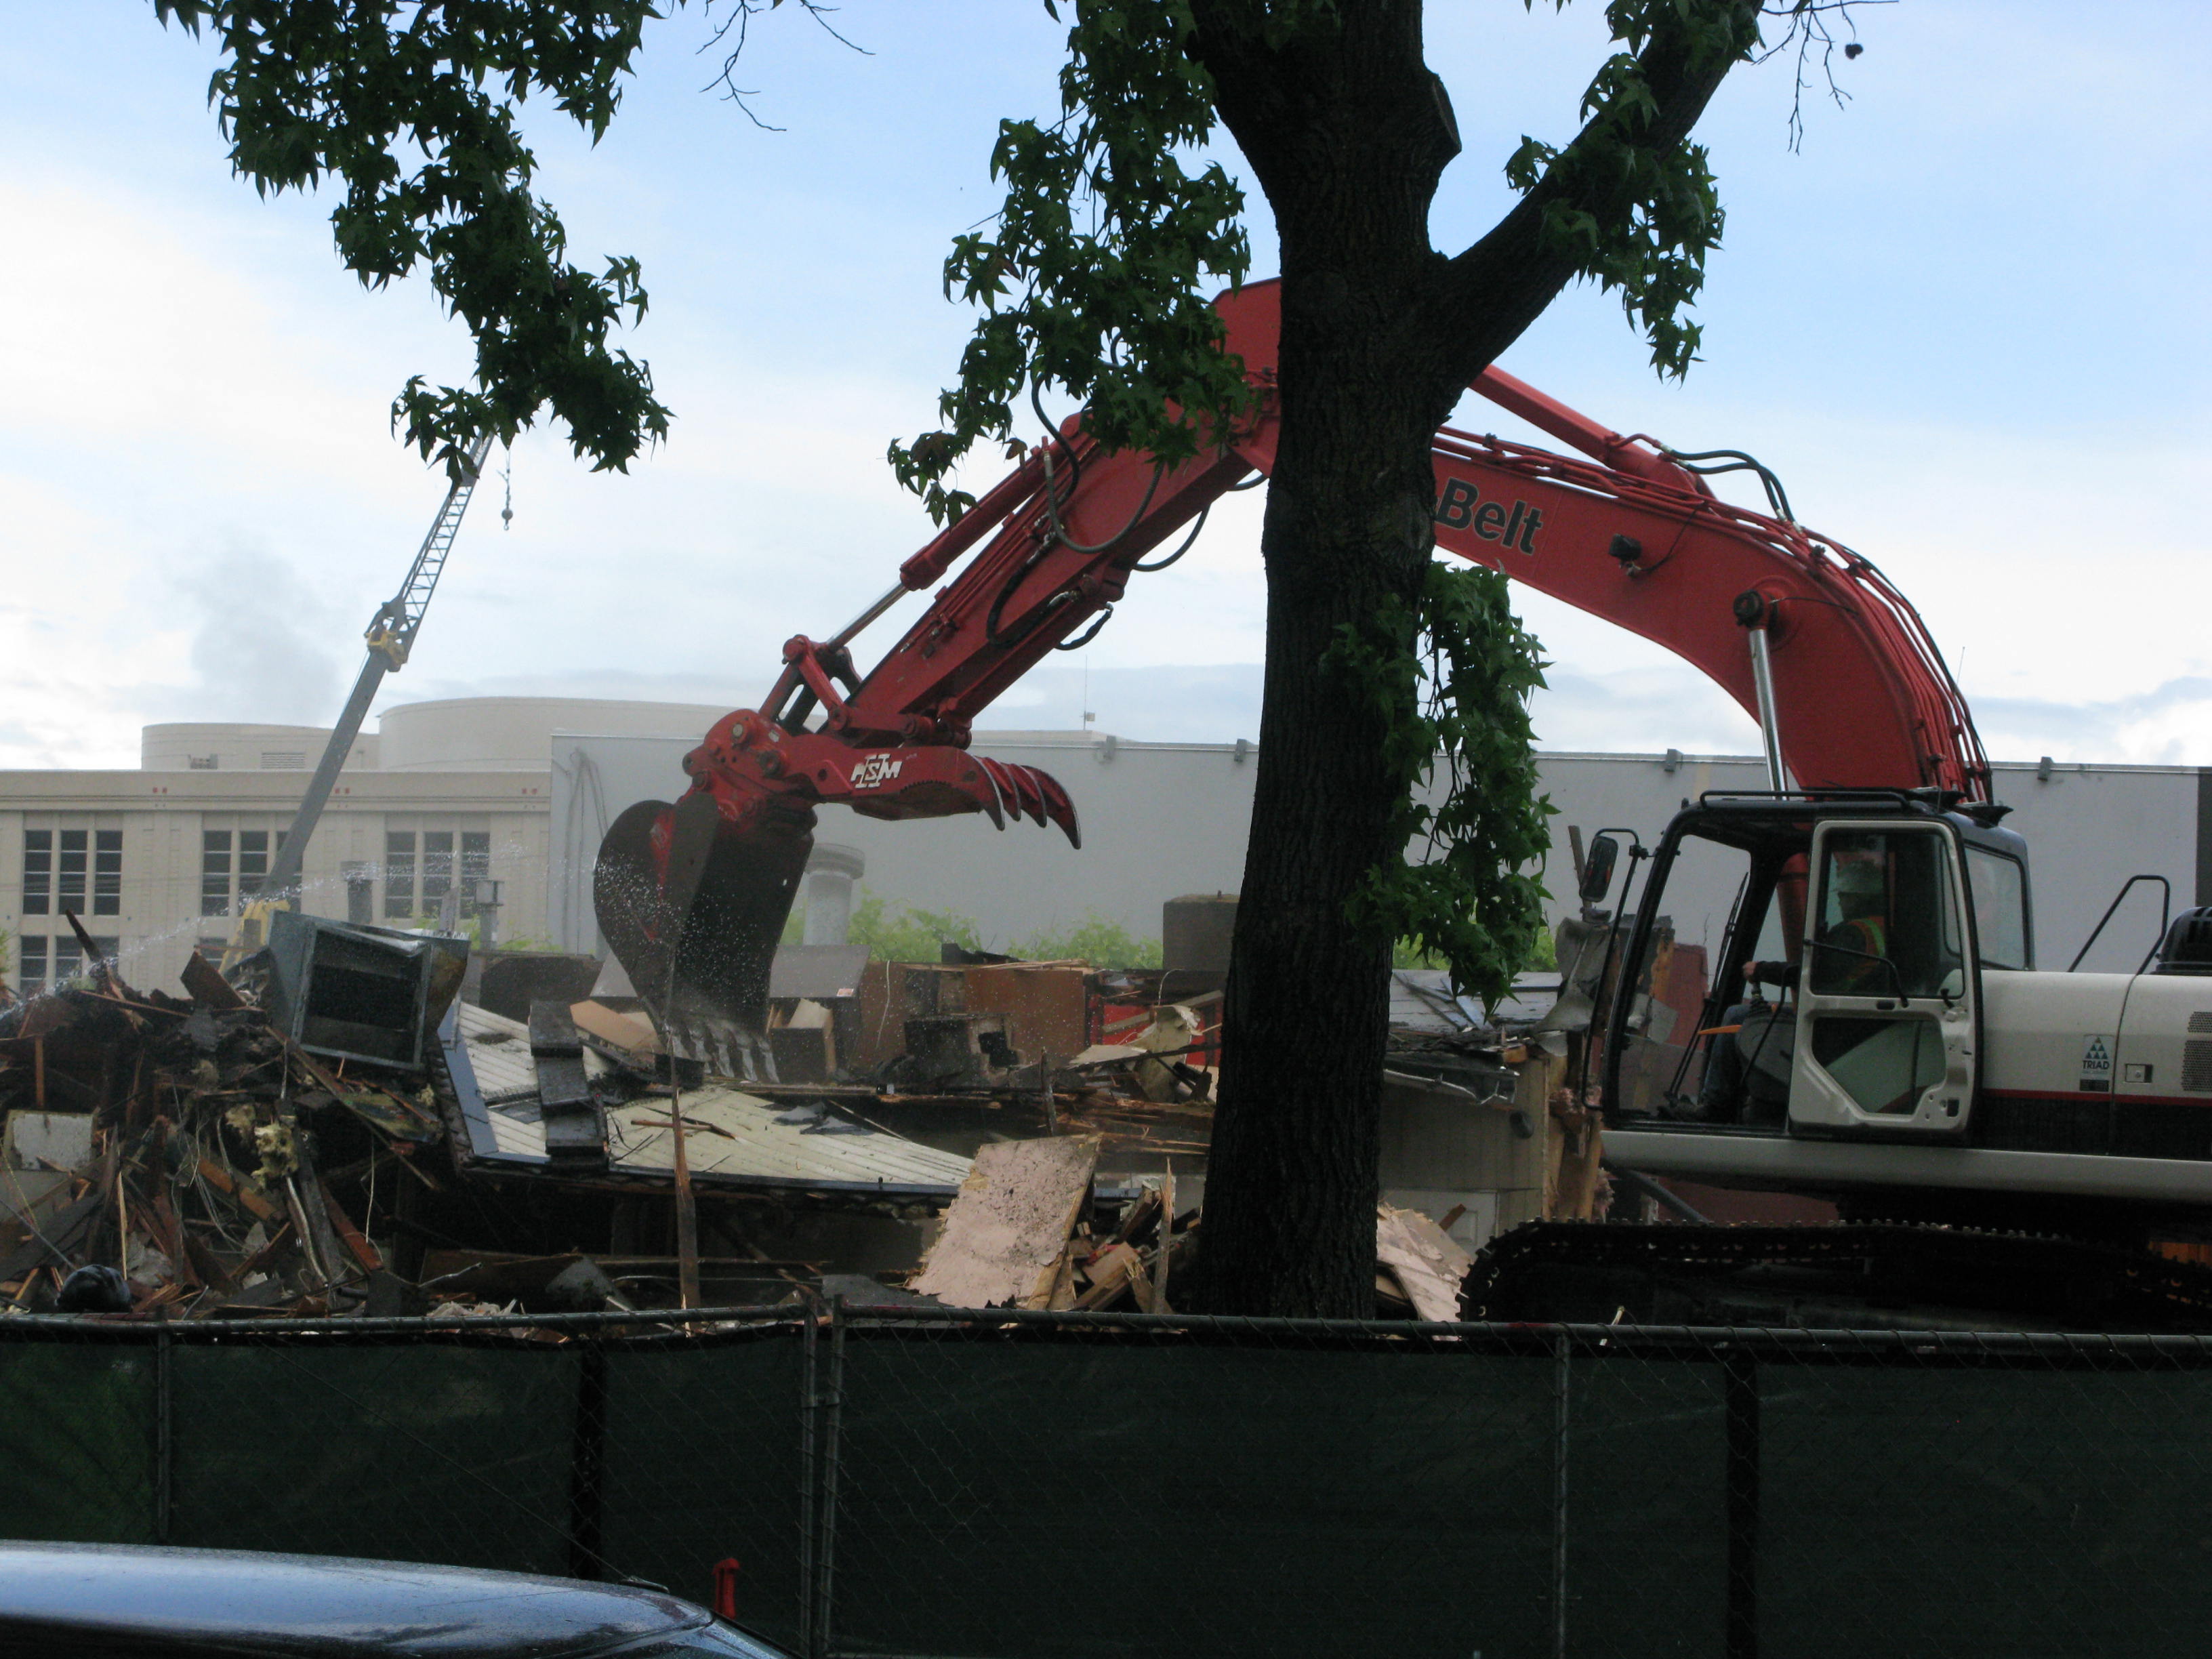 Tearing down the original New Old Lompoc in Northwest Portland. (FoystonFoto)